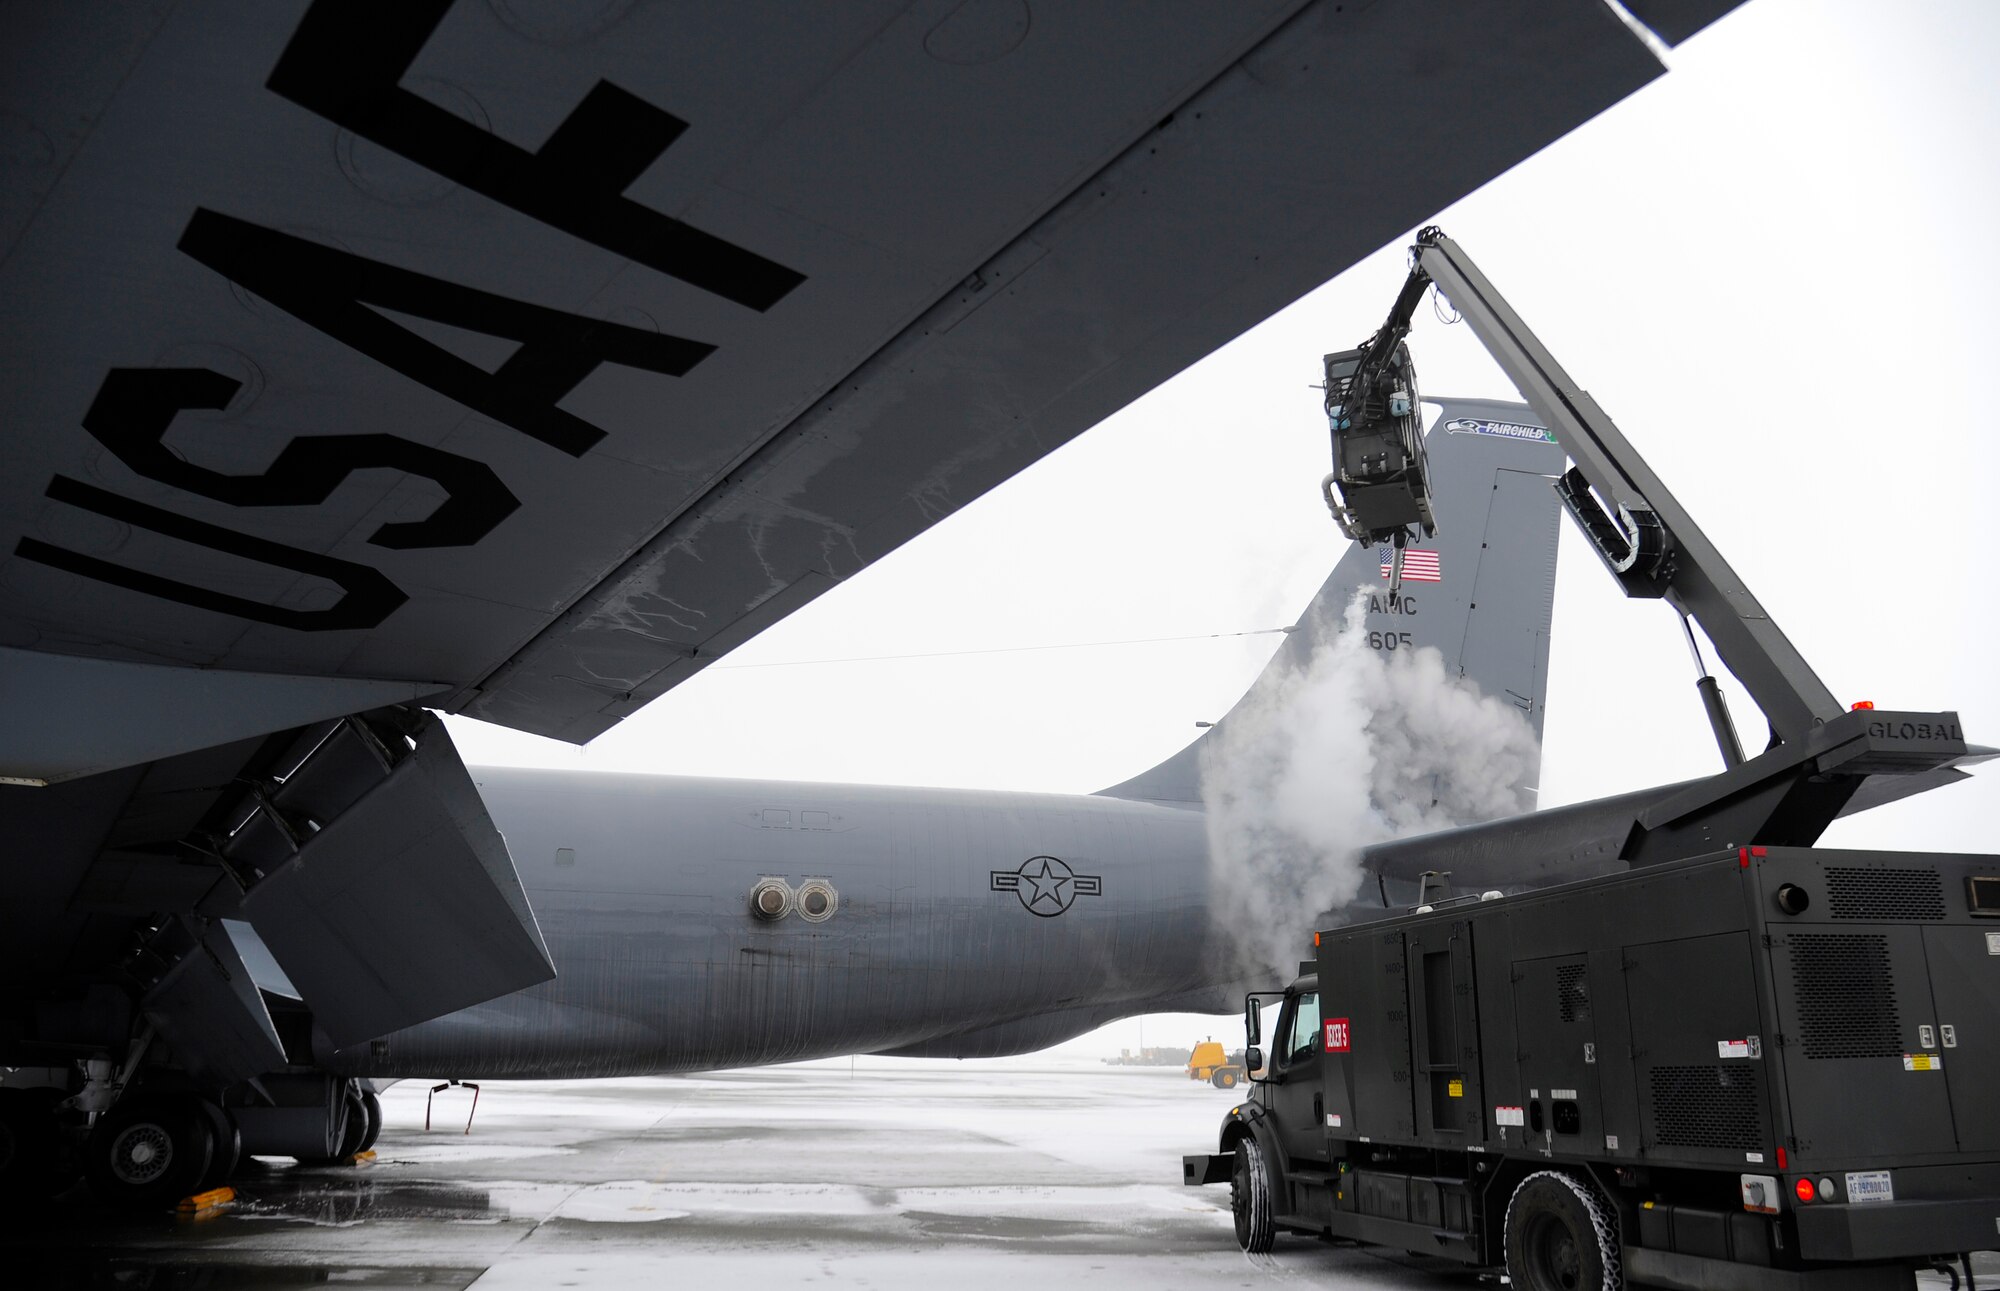 Staff Sgt. Aaron Wynhoff, 141st Aircraft Maintenance Squadron crew chief, applies de-icier to a KC-135 Stratotanker on the flight line at Fairchild Air Force Base, Wash., Jan. 24, 2013. Wynhoff is spraying the aircraft with chemicals that remove ice and prevent it from reforming during flight. (U.S.  Air Force photo by Airman 1st Class Ryan Zeski)